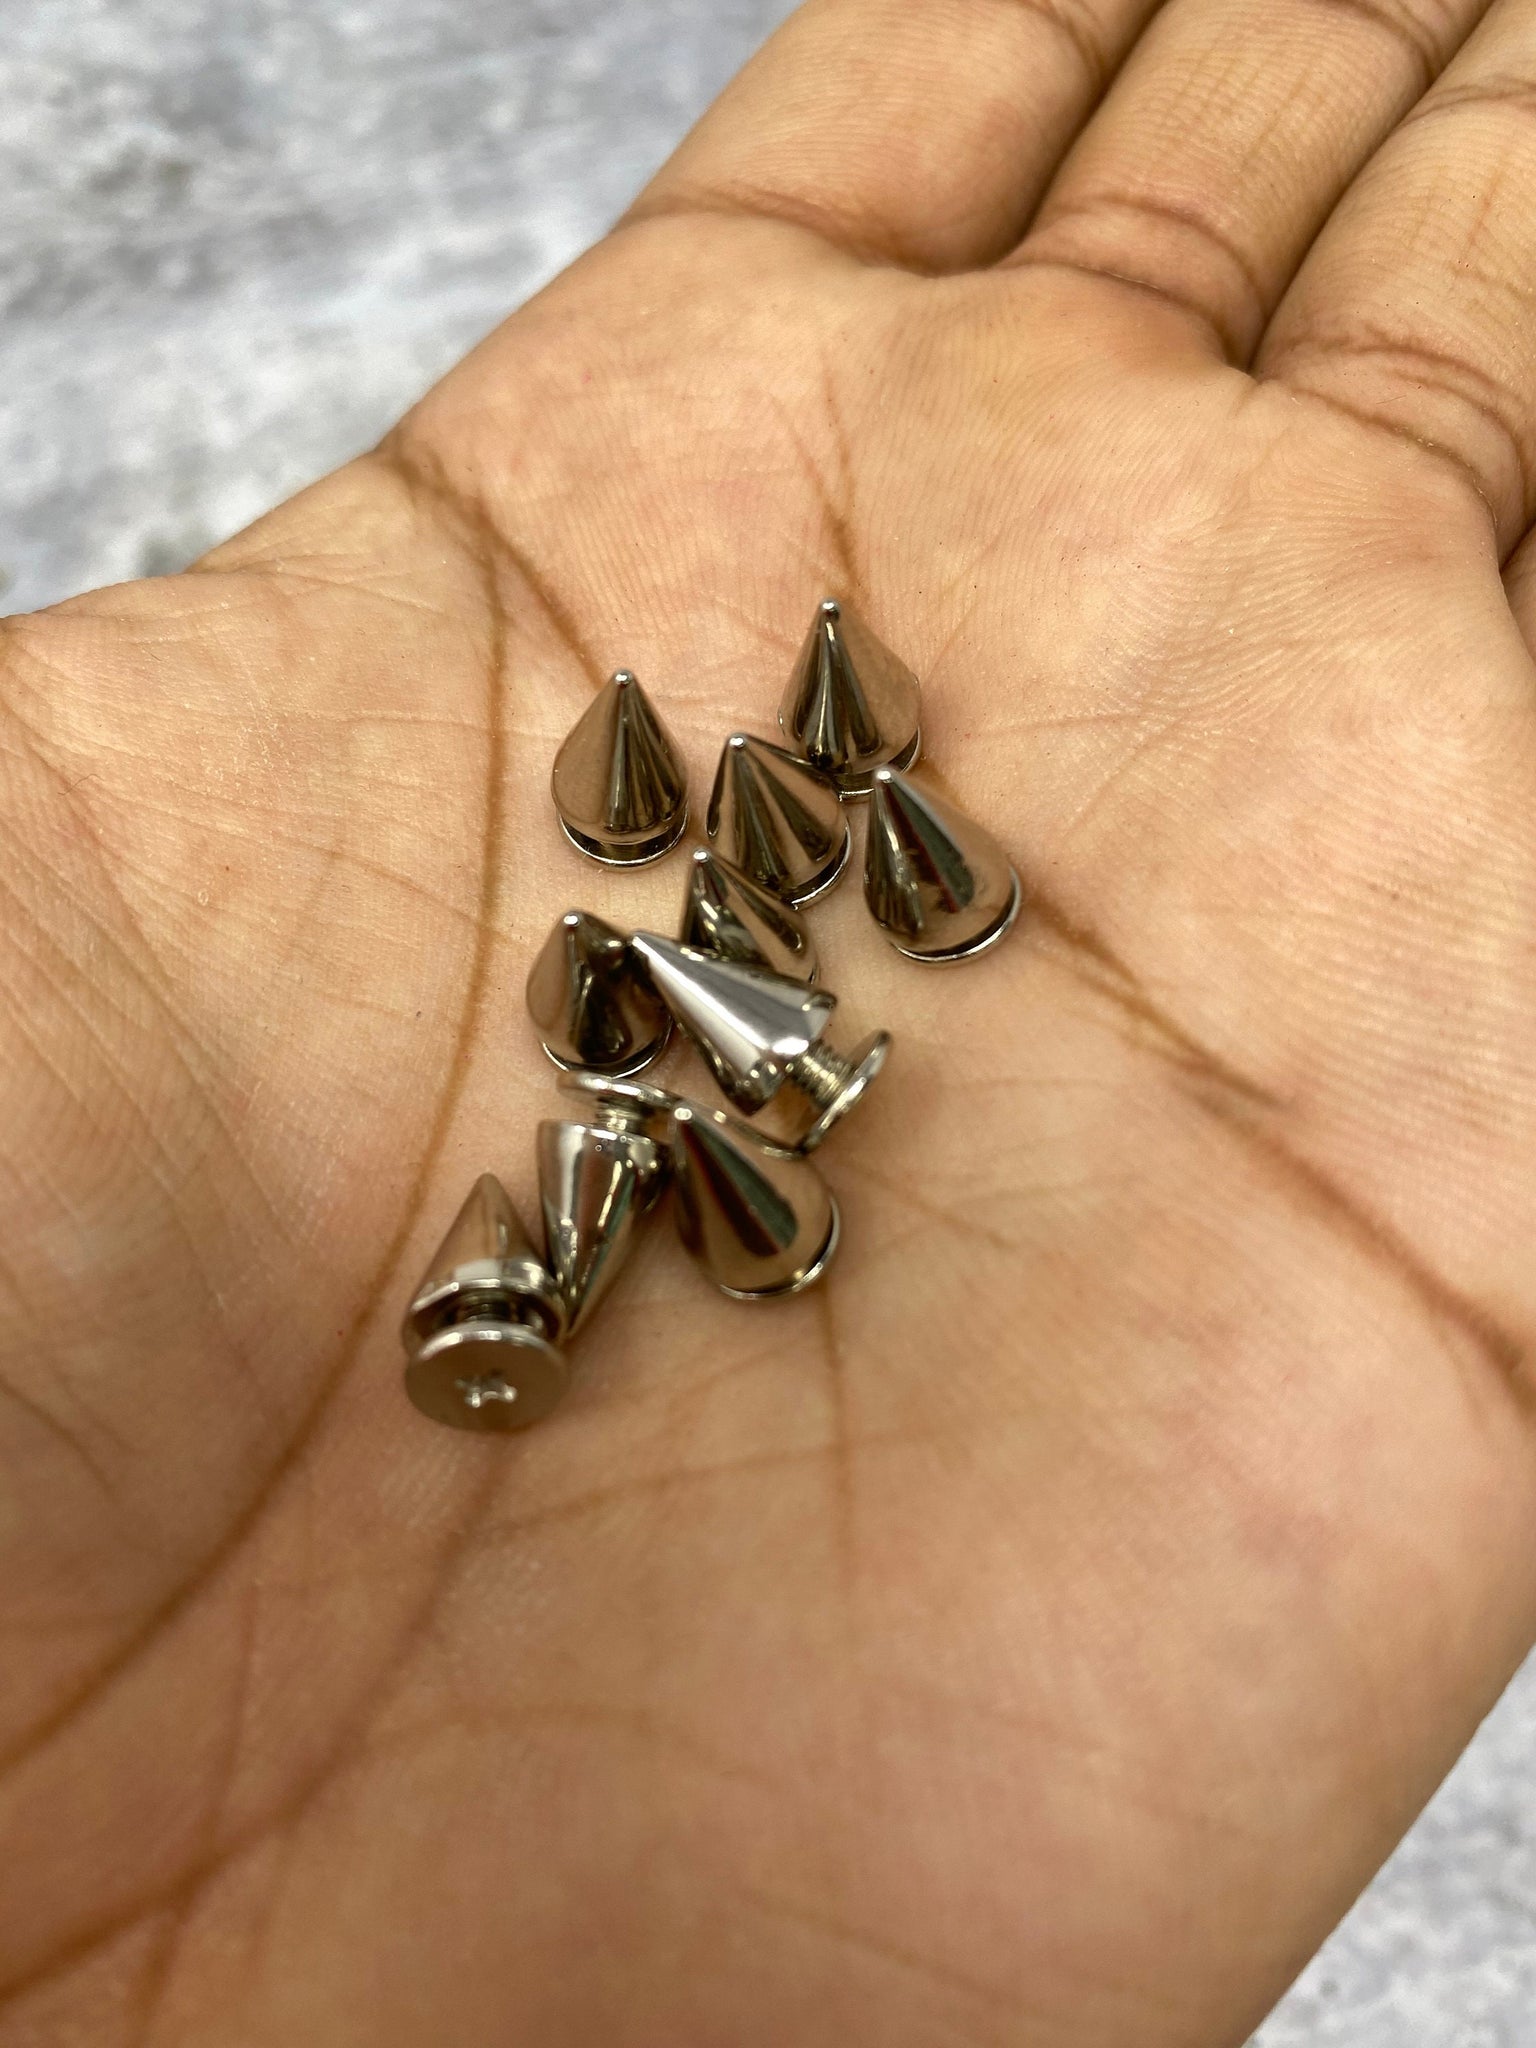 NEW, "Screw on Spikes", 10mm 3/8" SILVER Spiked Studs, Cone Spikes Screw-back Studs for Clothing, Leather, Spikes with Screws, 100 PCS